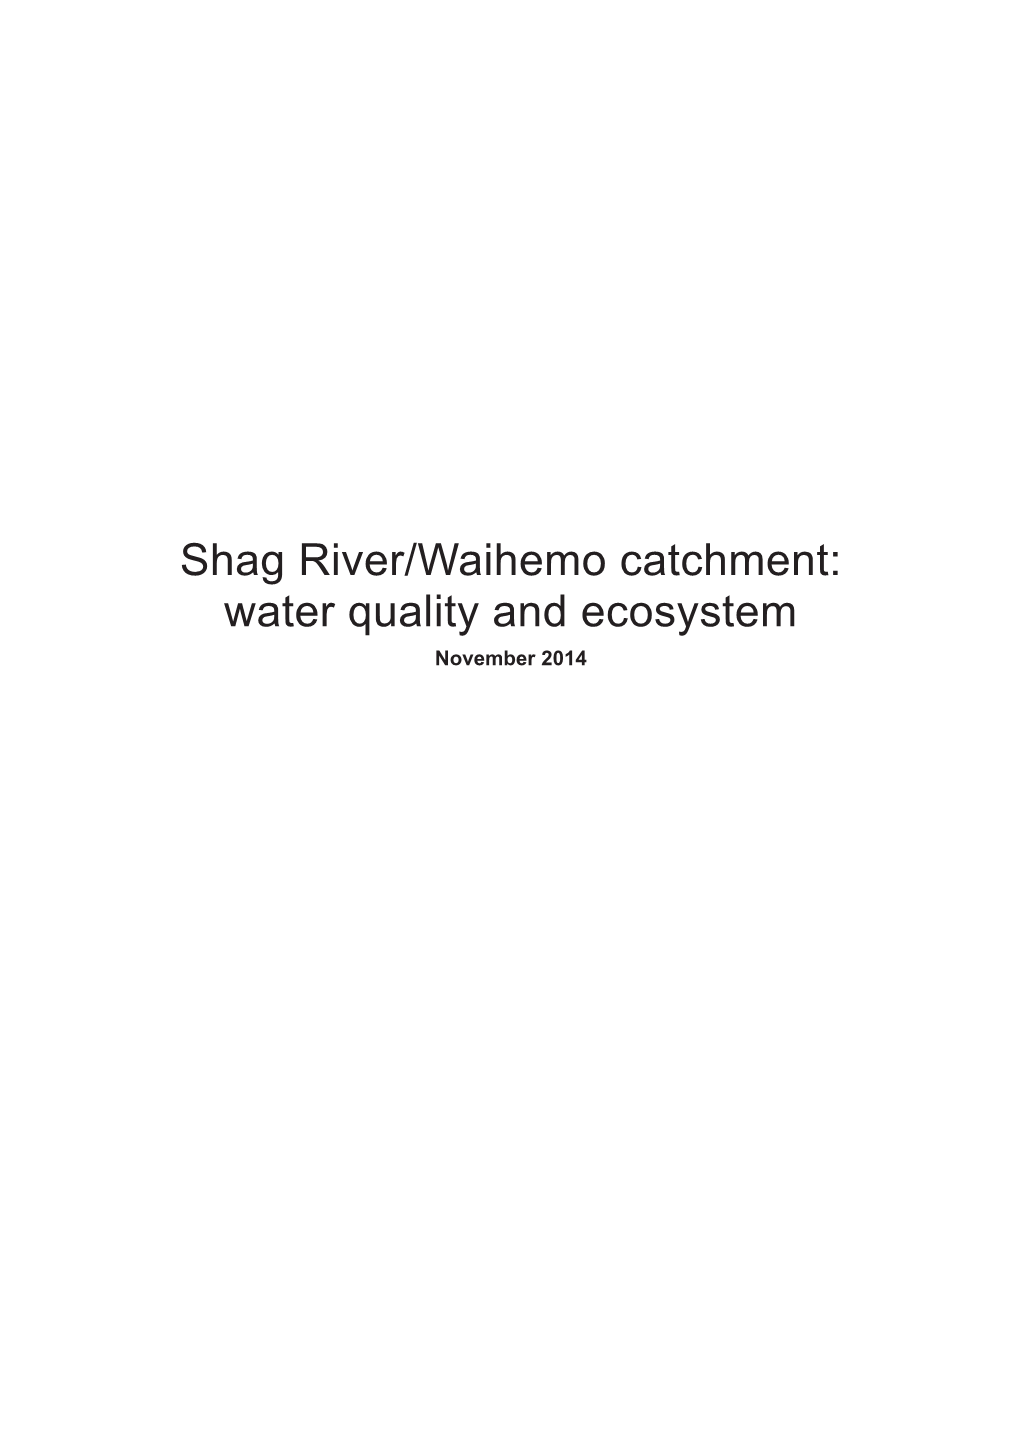 Shag River/Waihemo Catchment: Water Quality and Ecosystem November 2014